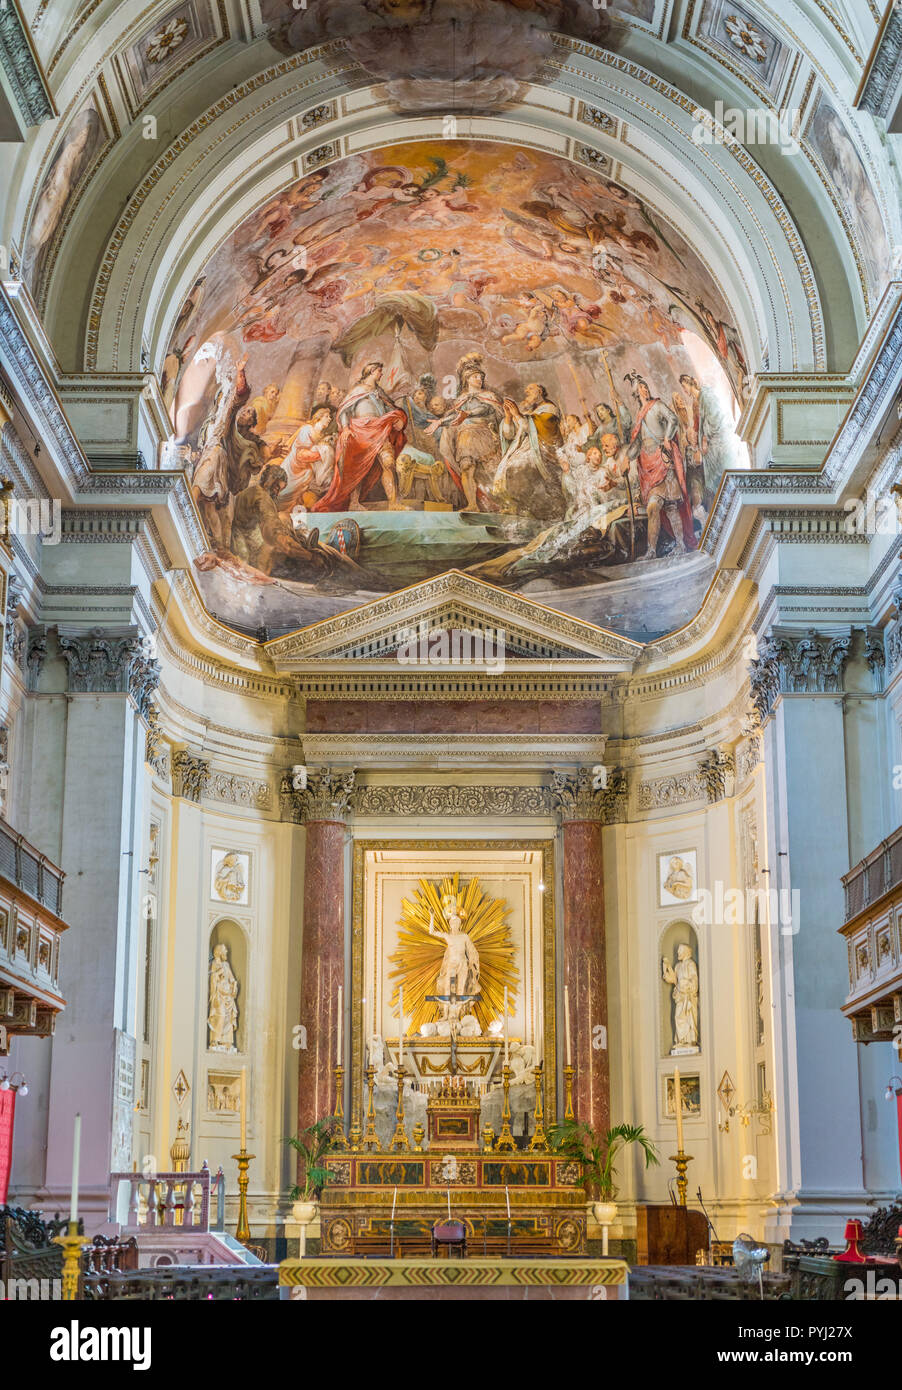 Main altar with frescoes by Mariano Rossi in the Cathedral of Palermo. Sicily, southern Italy. Stock Photo